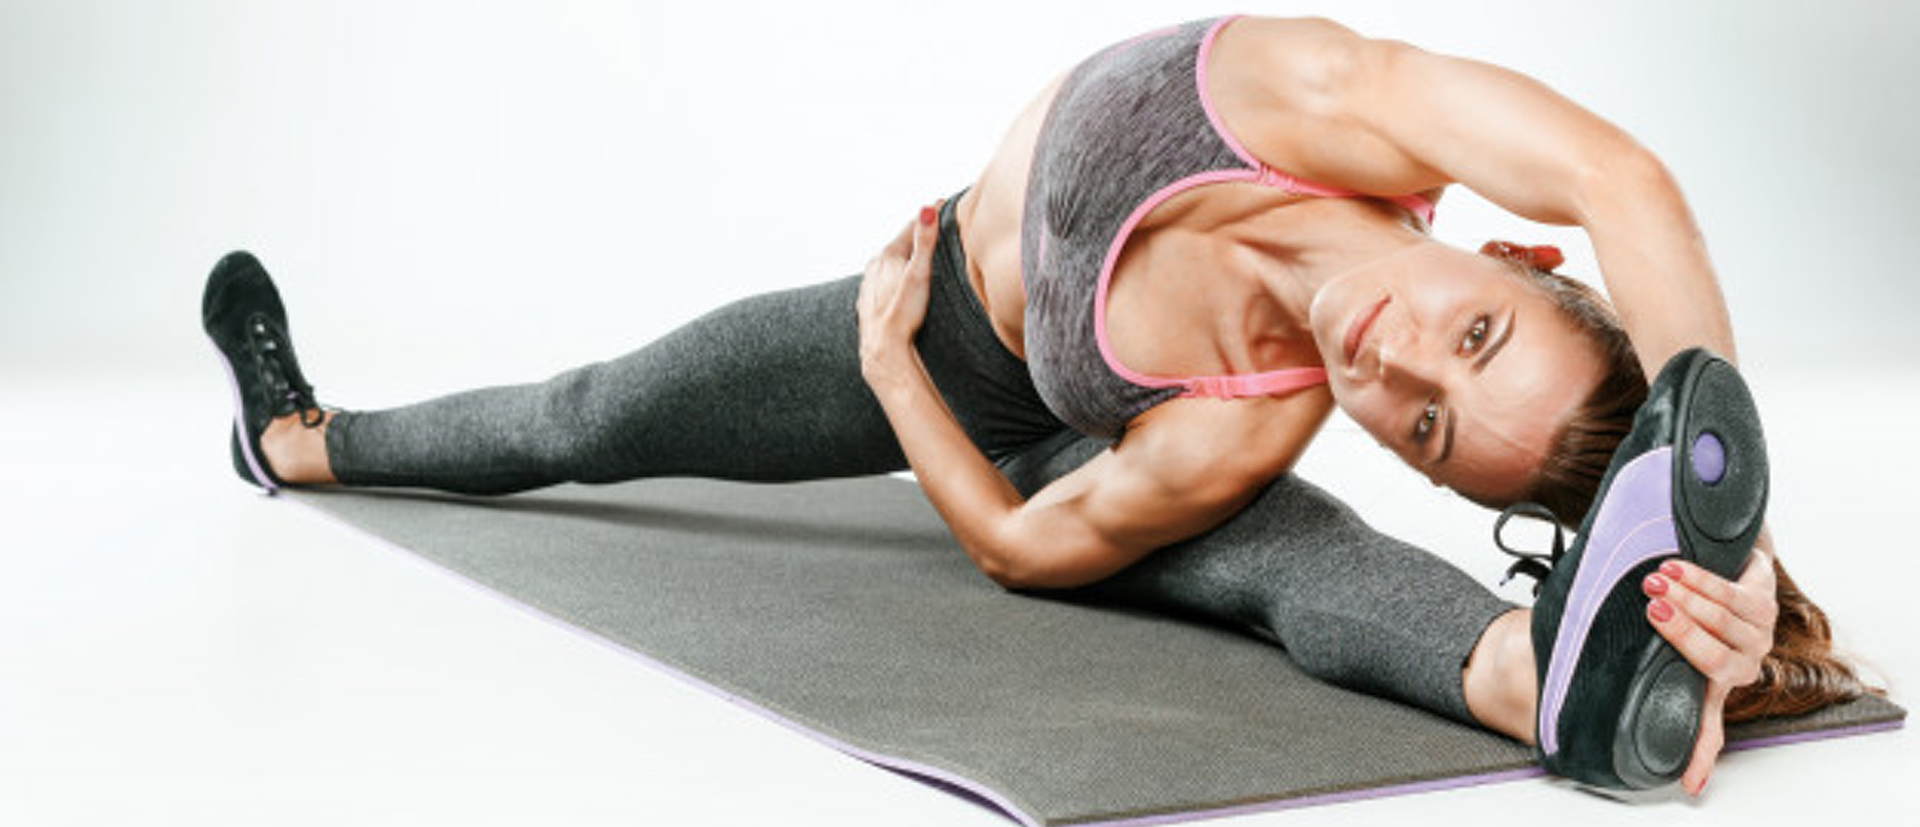 Woman athlete stretches sitting in straddle